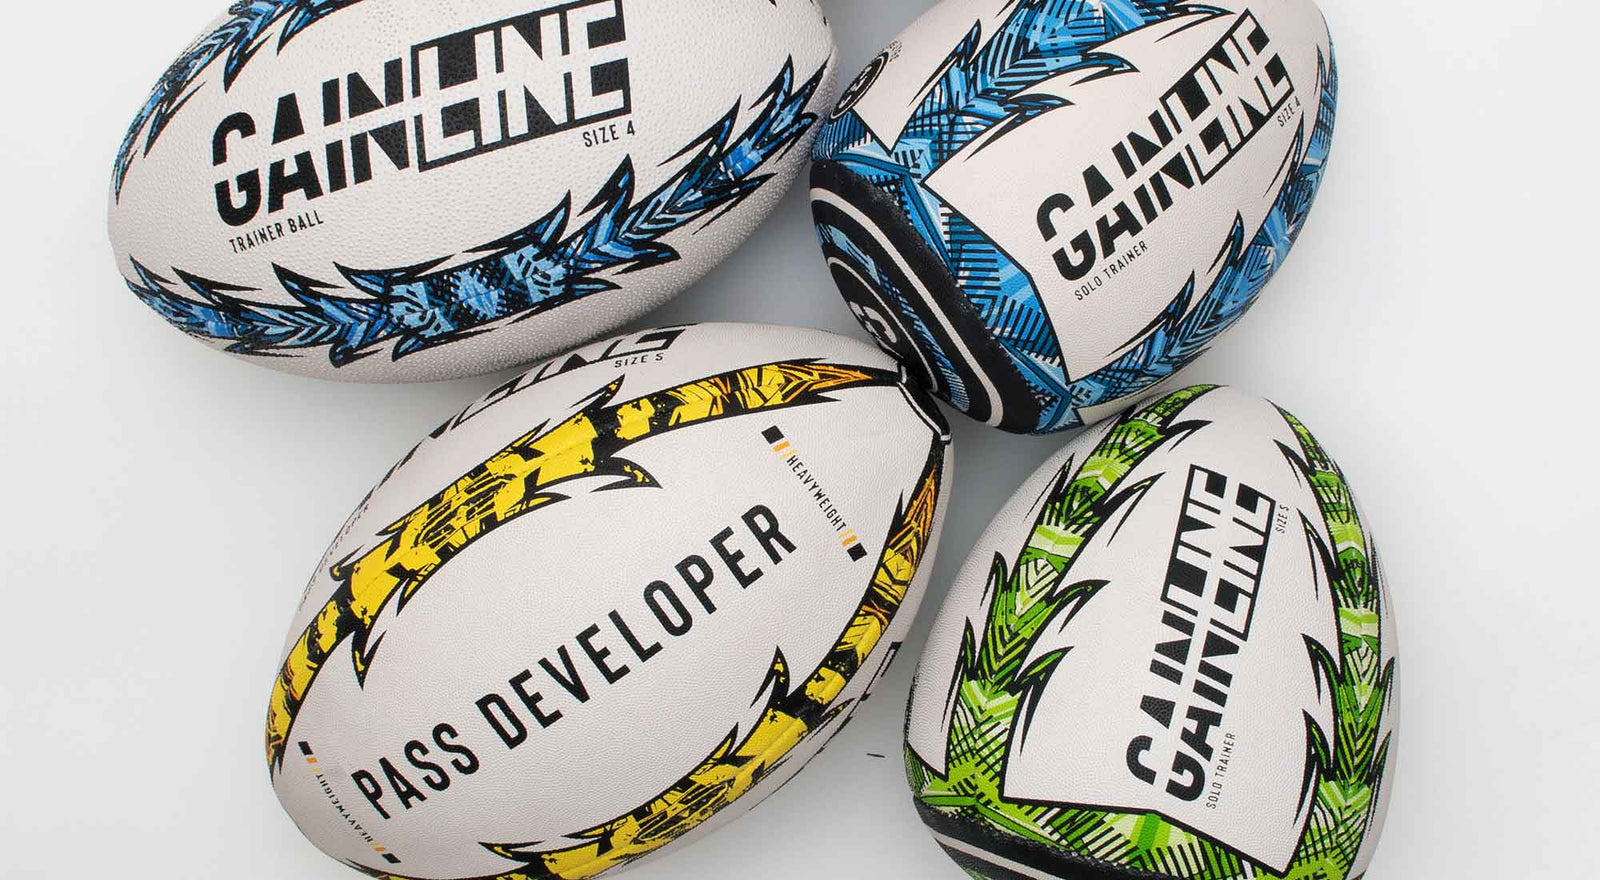 Exclusive to Absolute Rugby - Gainline Rugby - Absolute Rugby